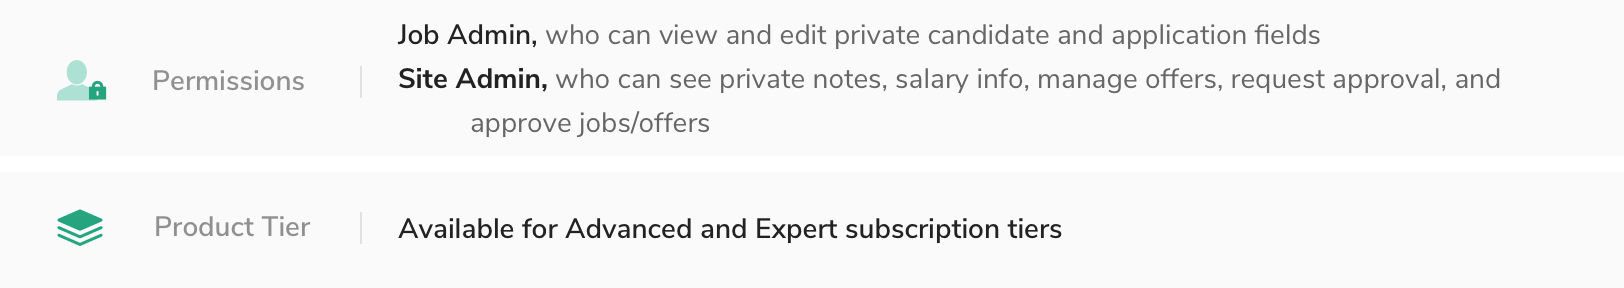 private_candidate_fields_-_advanced_and_expert.png